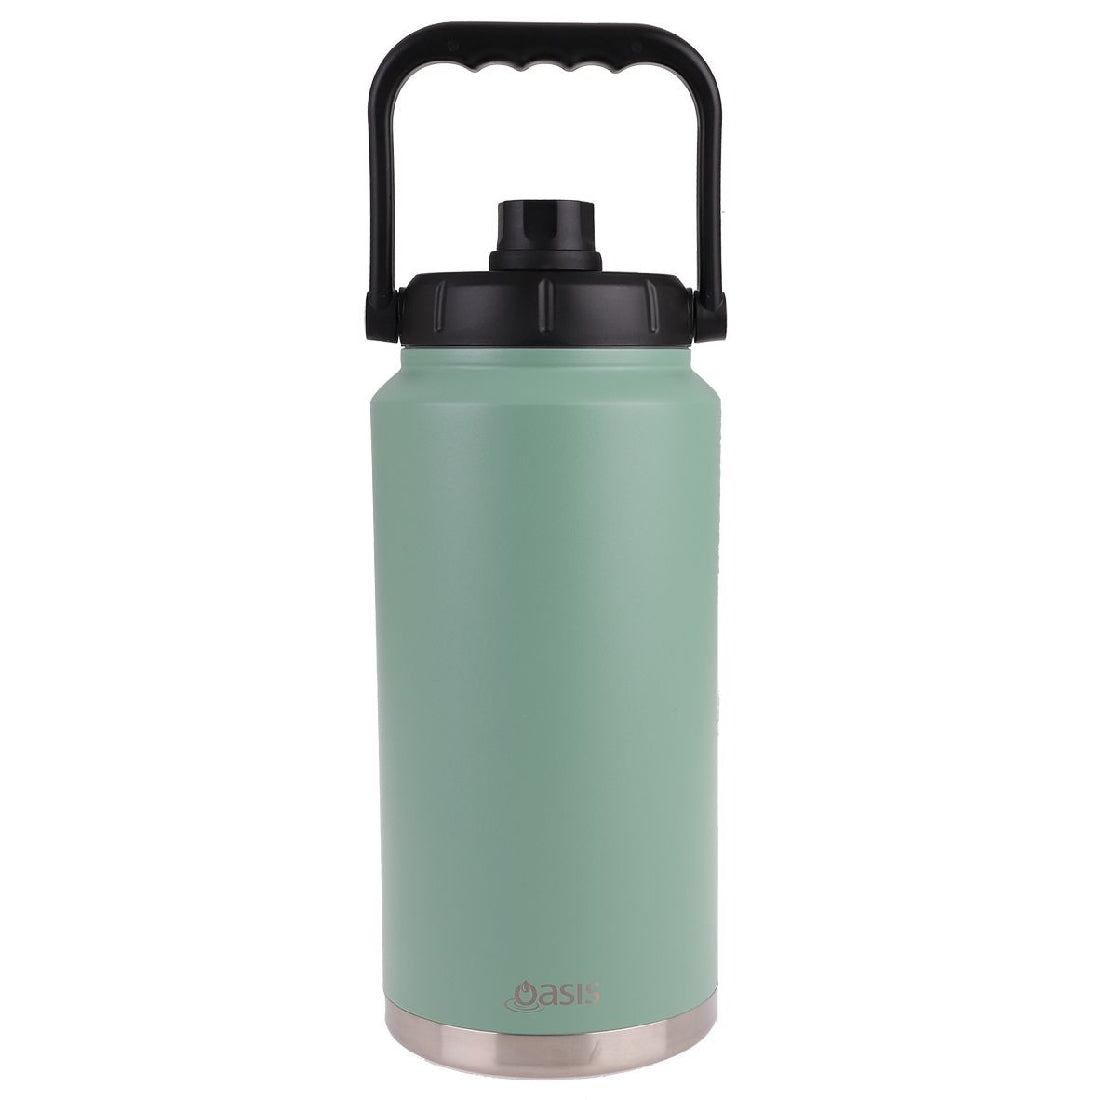 Oasis S/s Insulated Jug W/ Carry Handle 3.8l Sage